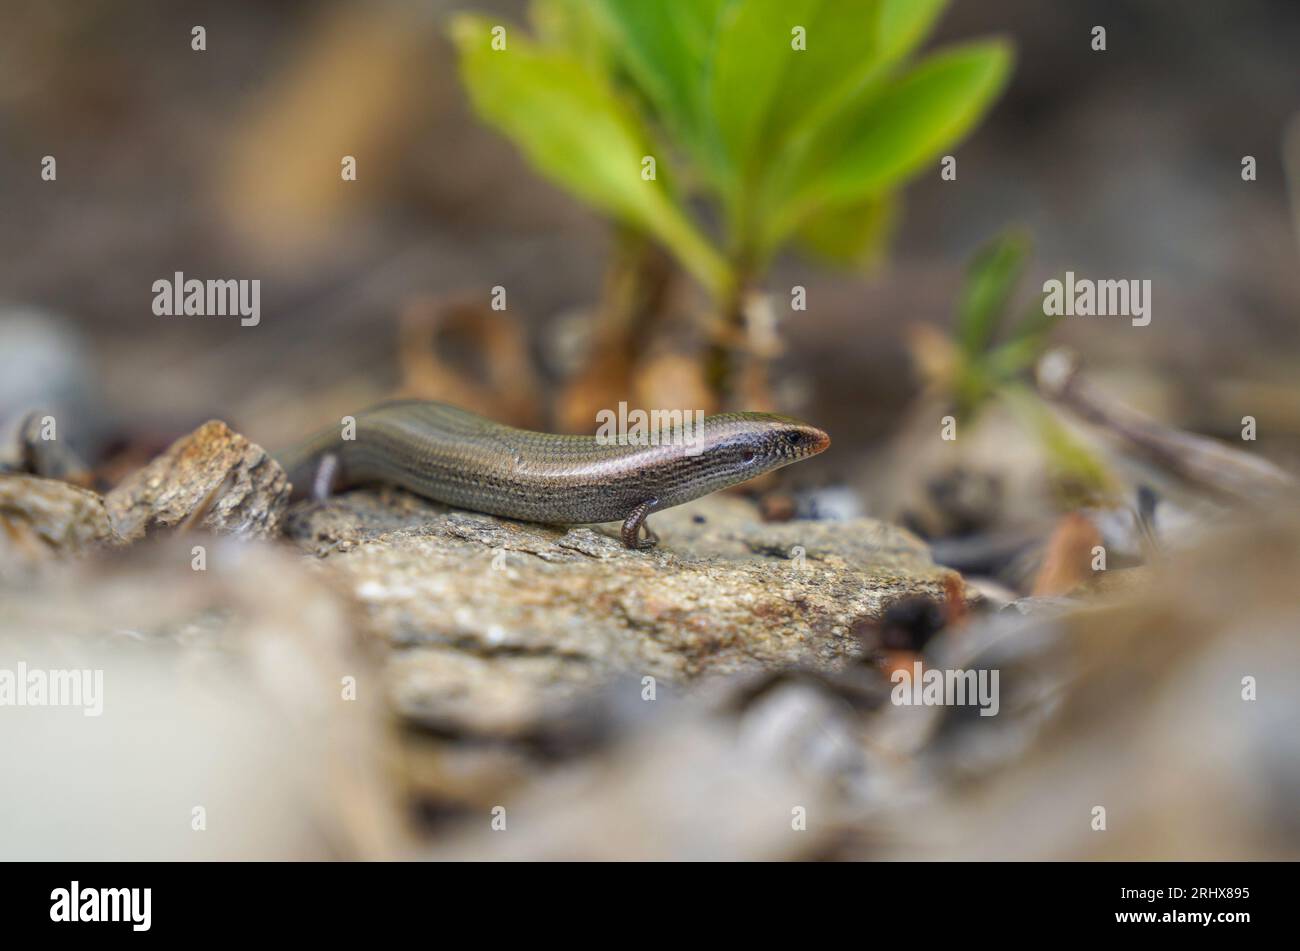 A Bedriaga's skink (Chalcides bedriagai) on a rock coming out of shade, Andalucia, Spain. Stock Photo